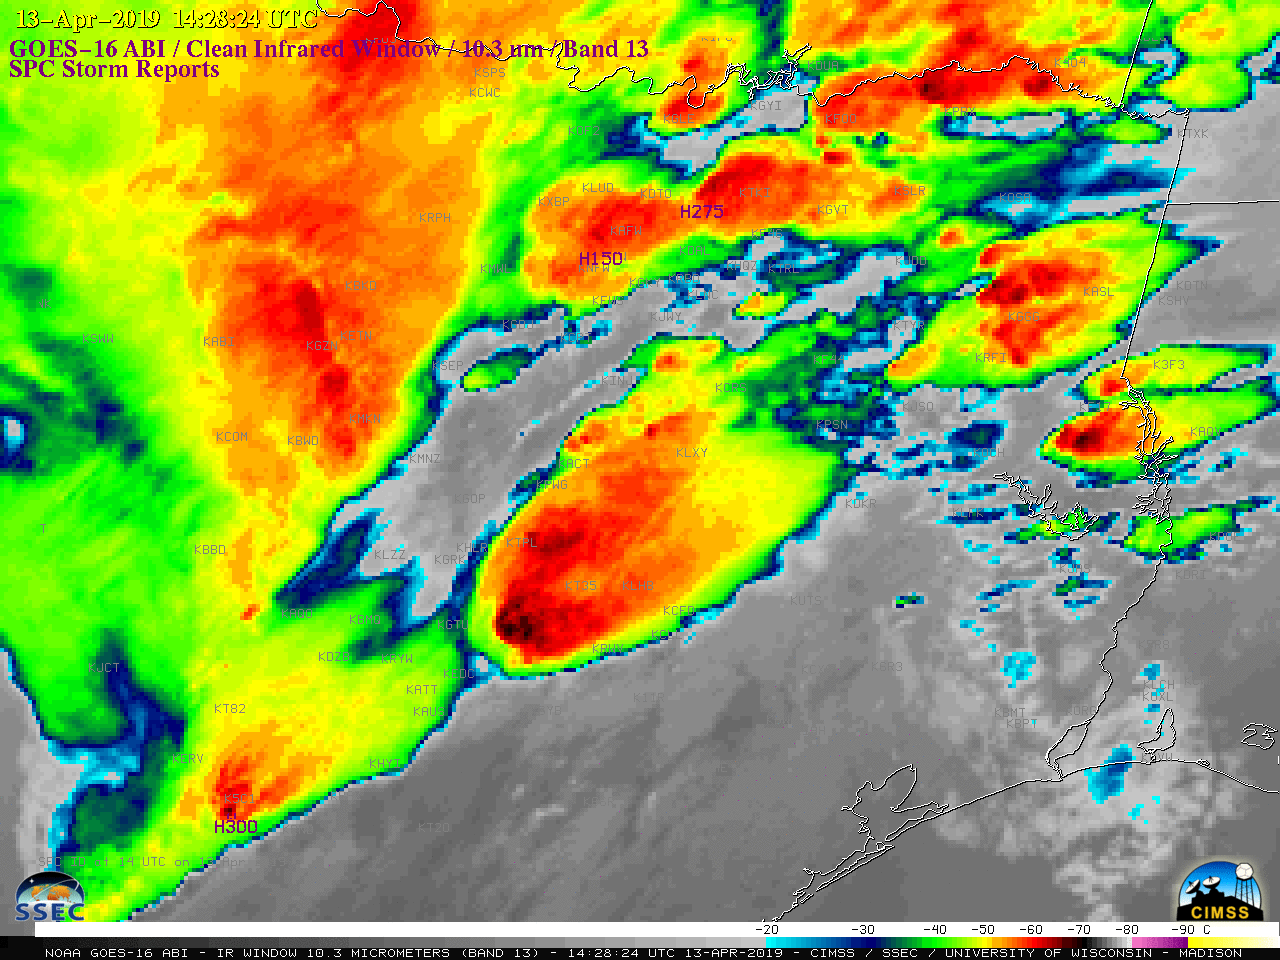 GOES-16 "Clean" Infrared Window (10.3 µm) images, with SPC storm reports plotted in purple [click to play MP4 animation]